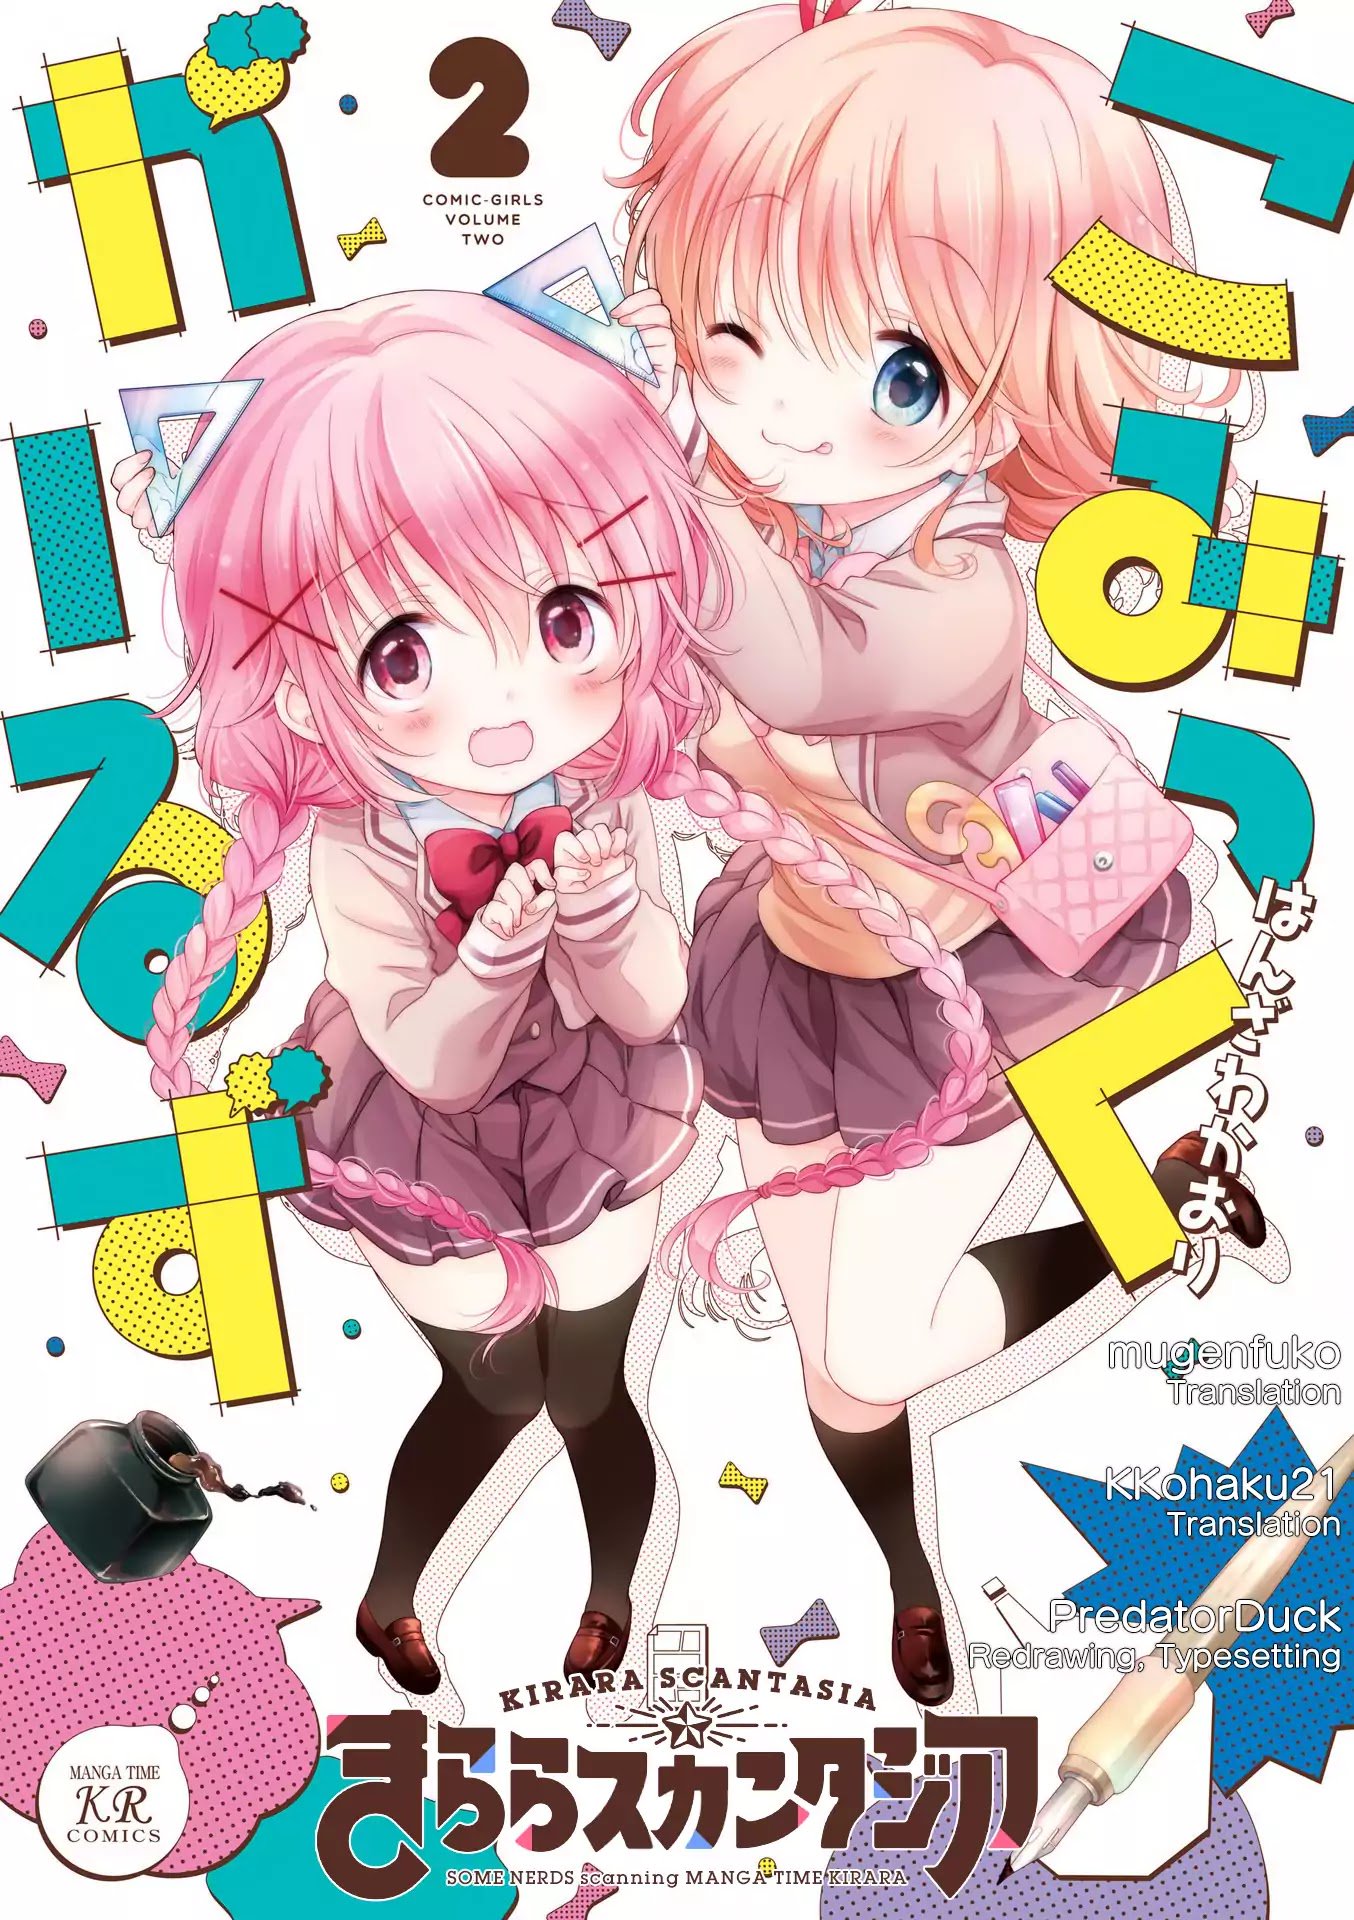 Comic Girls Chapter 23 Page 1